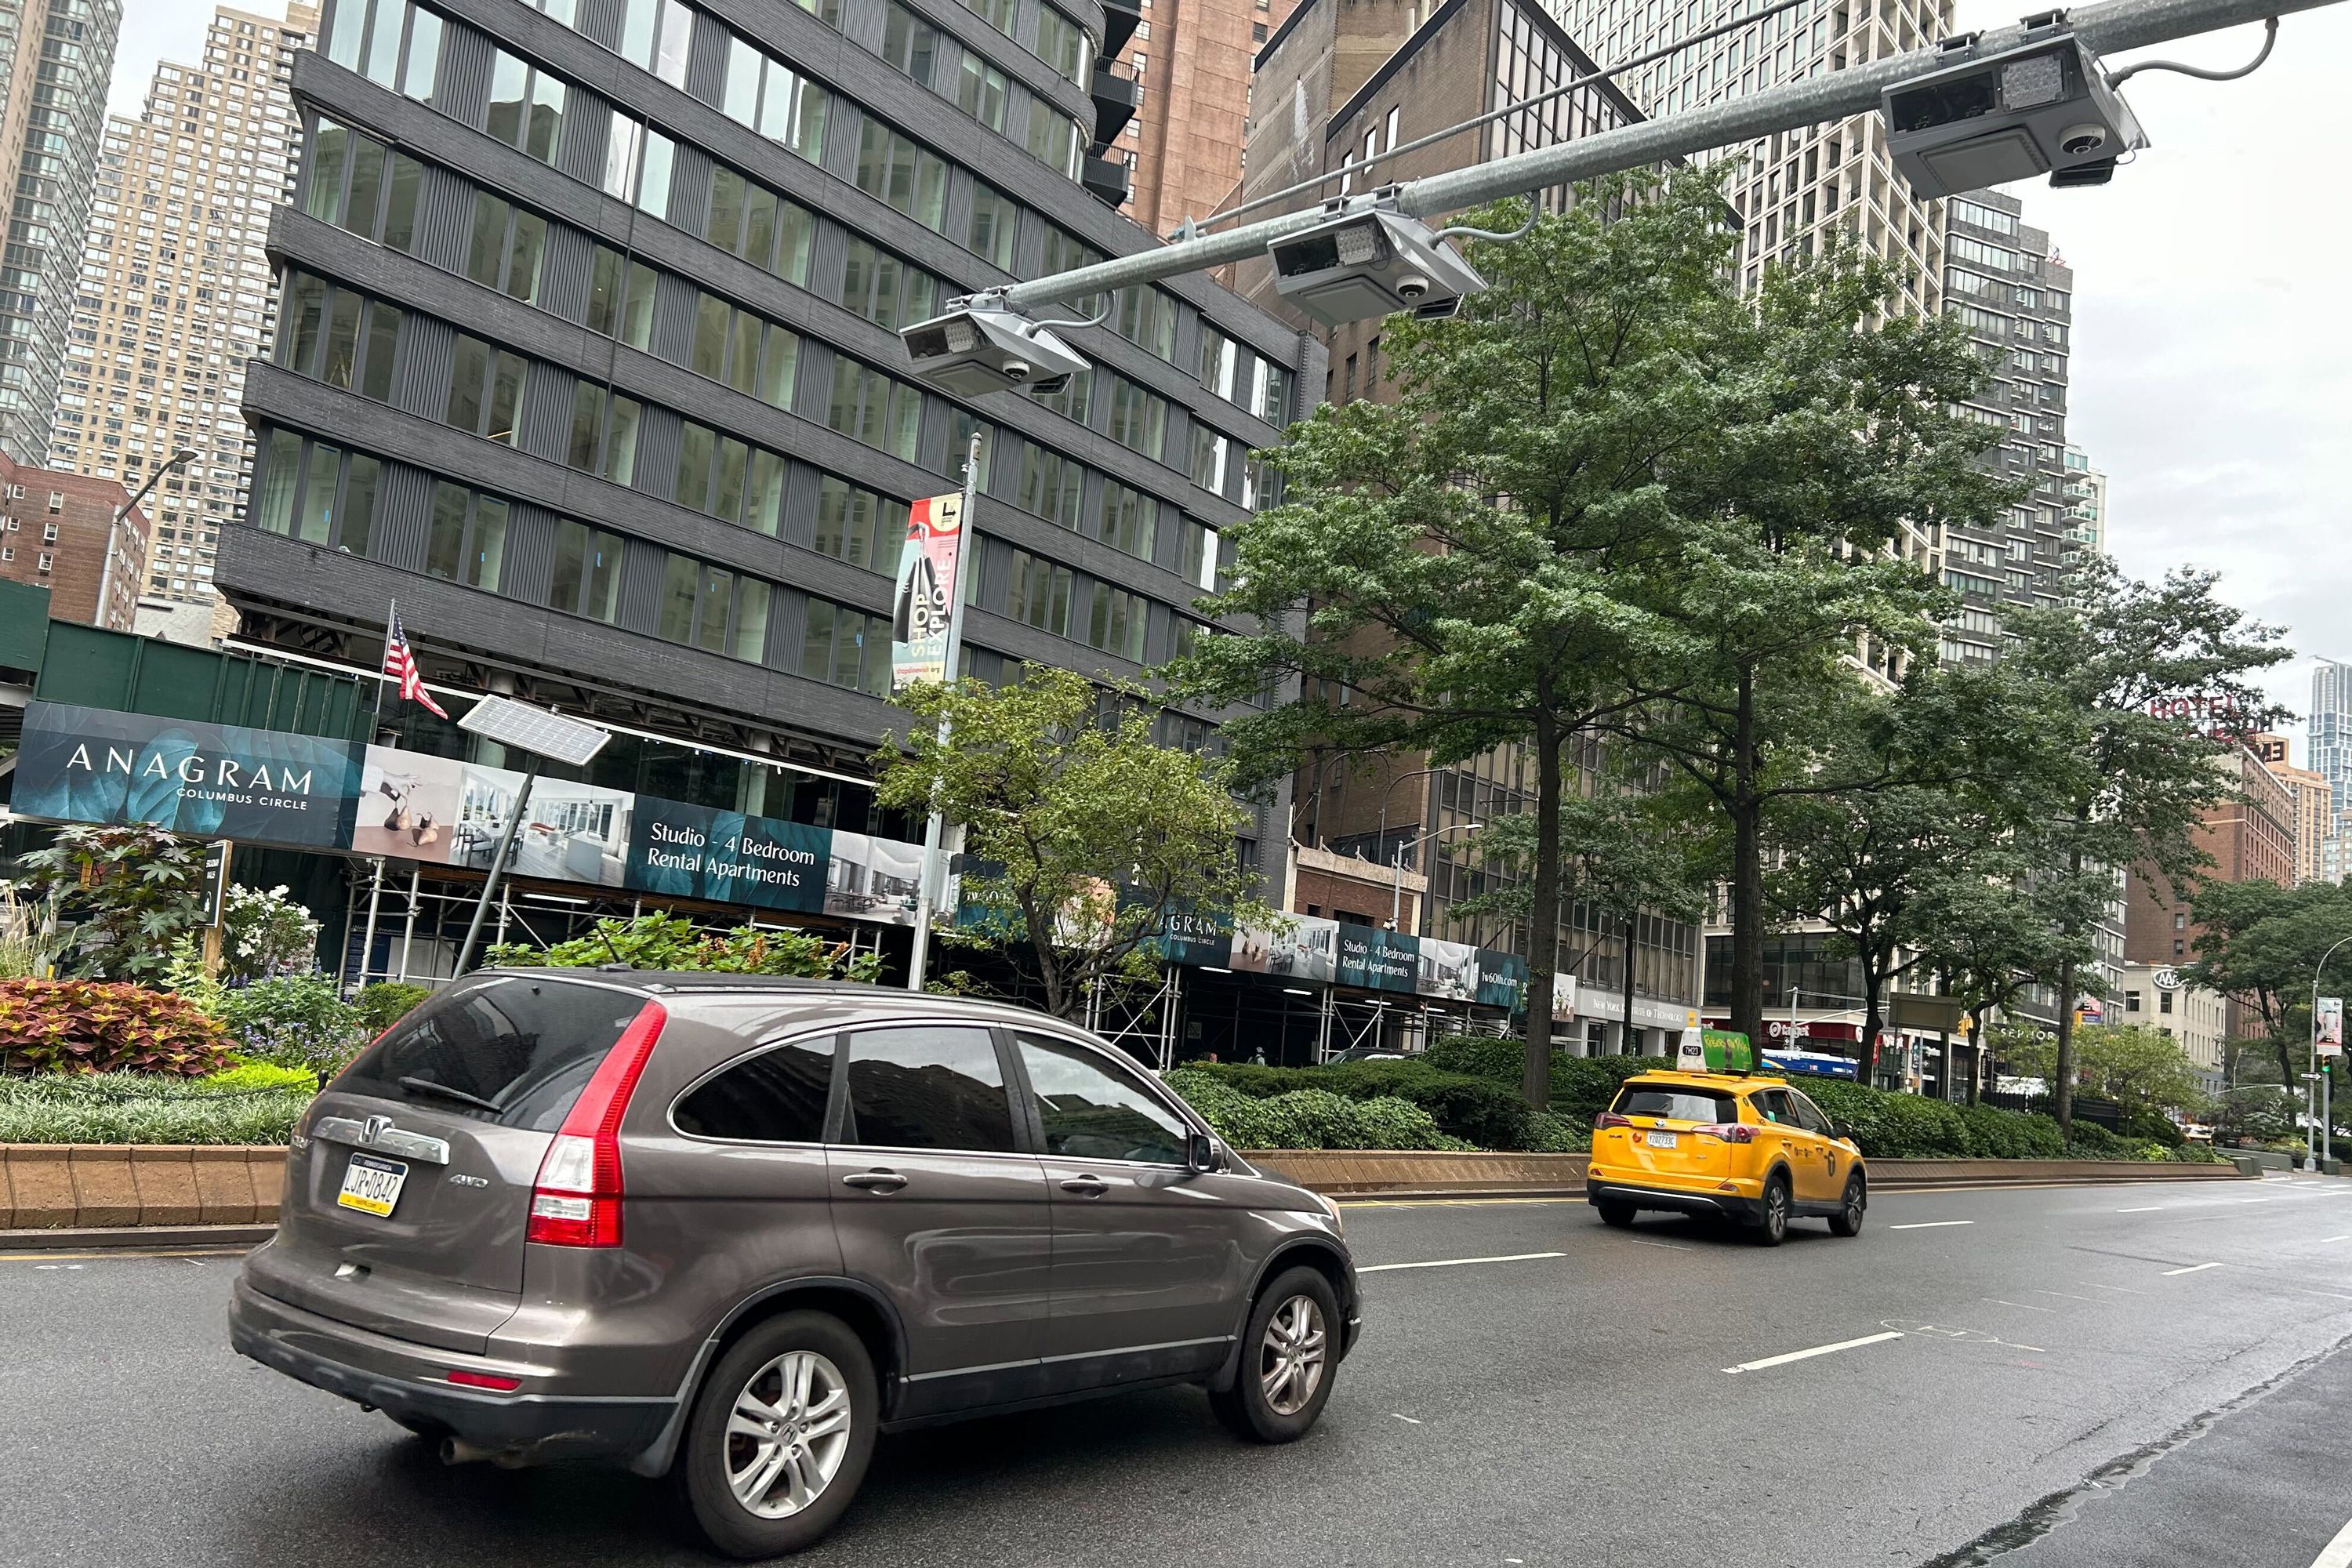 The toll system and equipment needed to make congestion pricing operational by next spring was been installed near Columbus Circle.